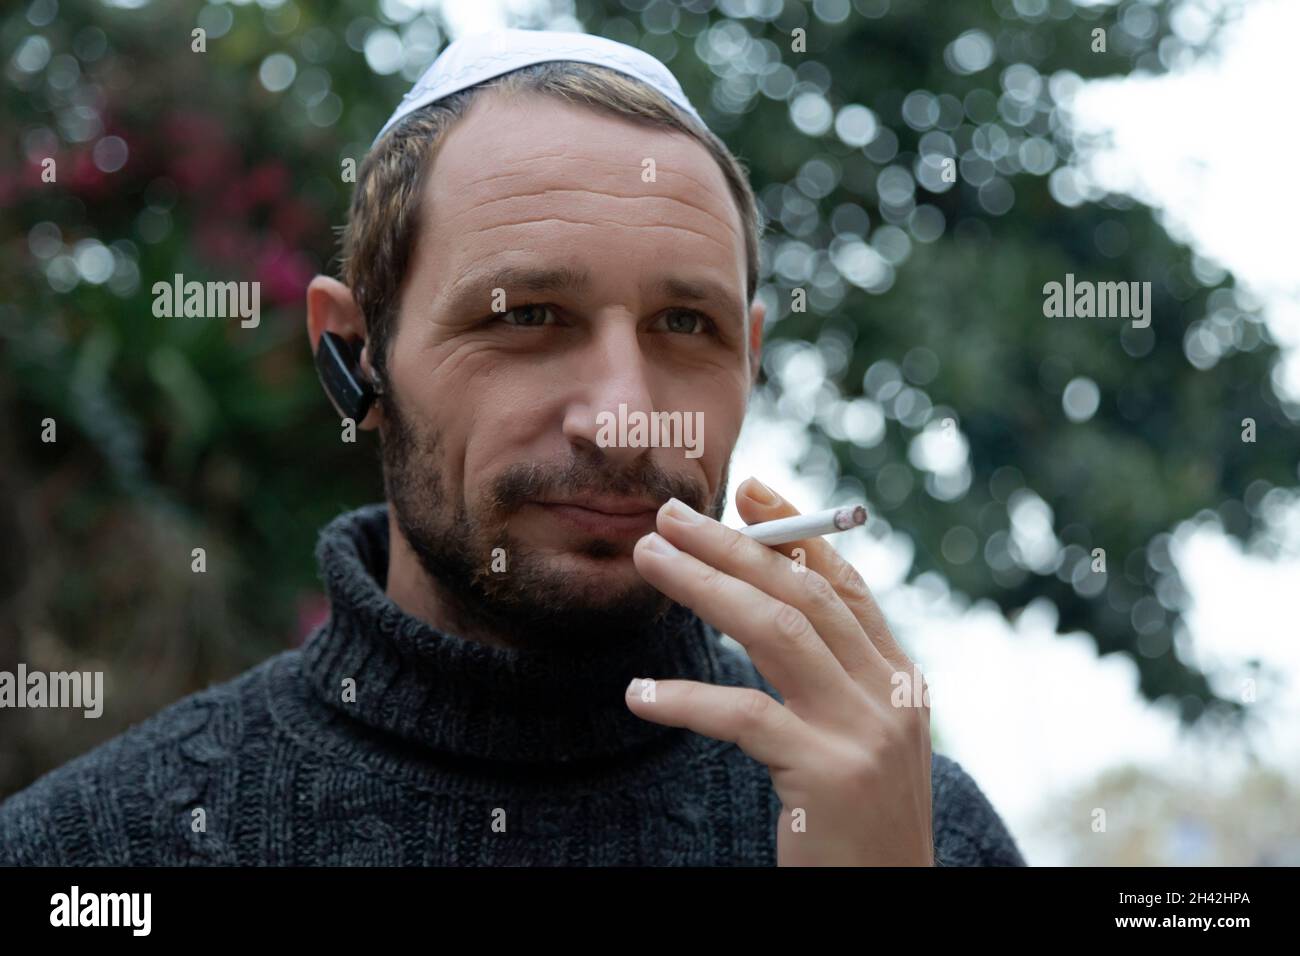 Jewish man wearing kippah in Hebrew or yarmulke with green trees in the background, beard wearing black sweatshirt. Portrait of a middle aged man with Stock Photo